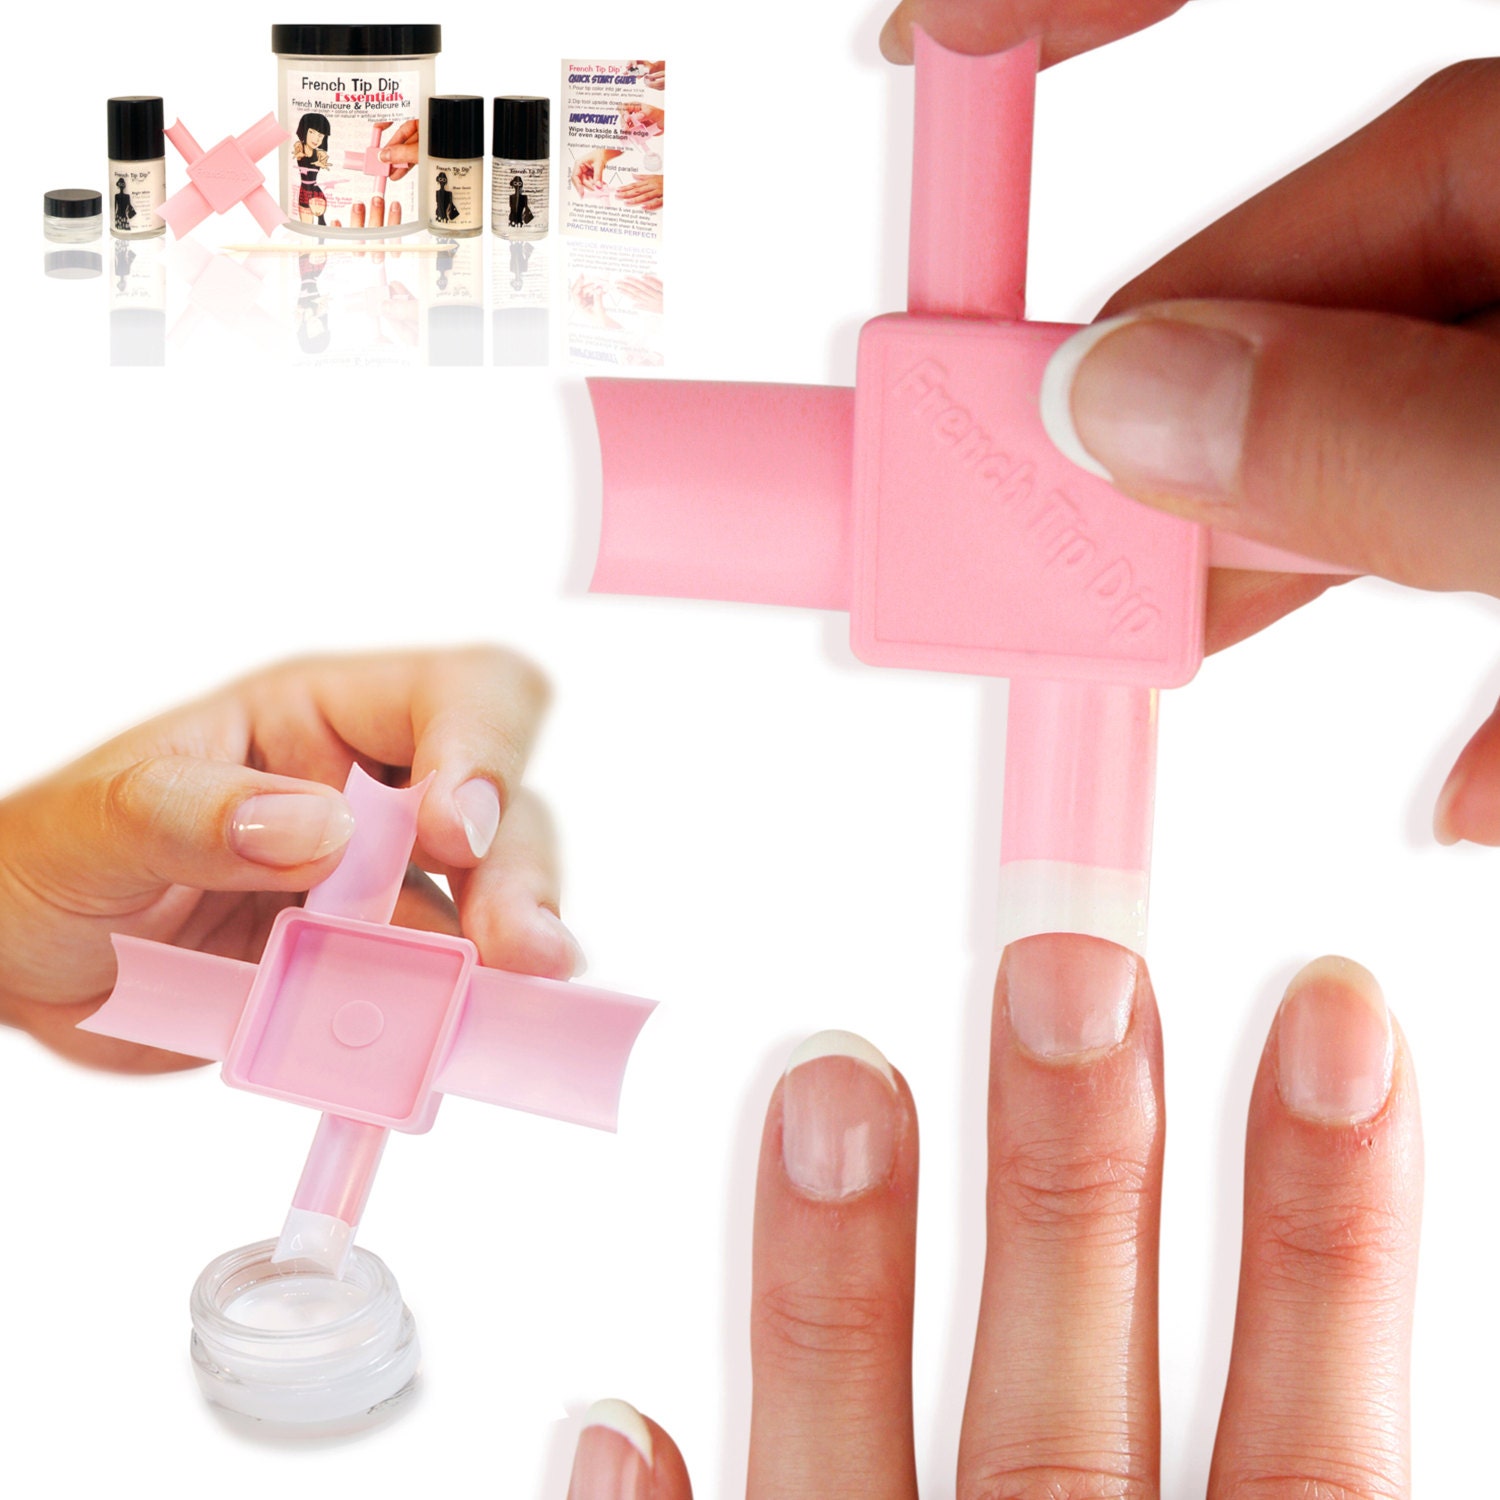 French Tip Dip Essentials Instat French Manicure & by FrenchTipDip